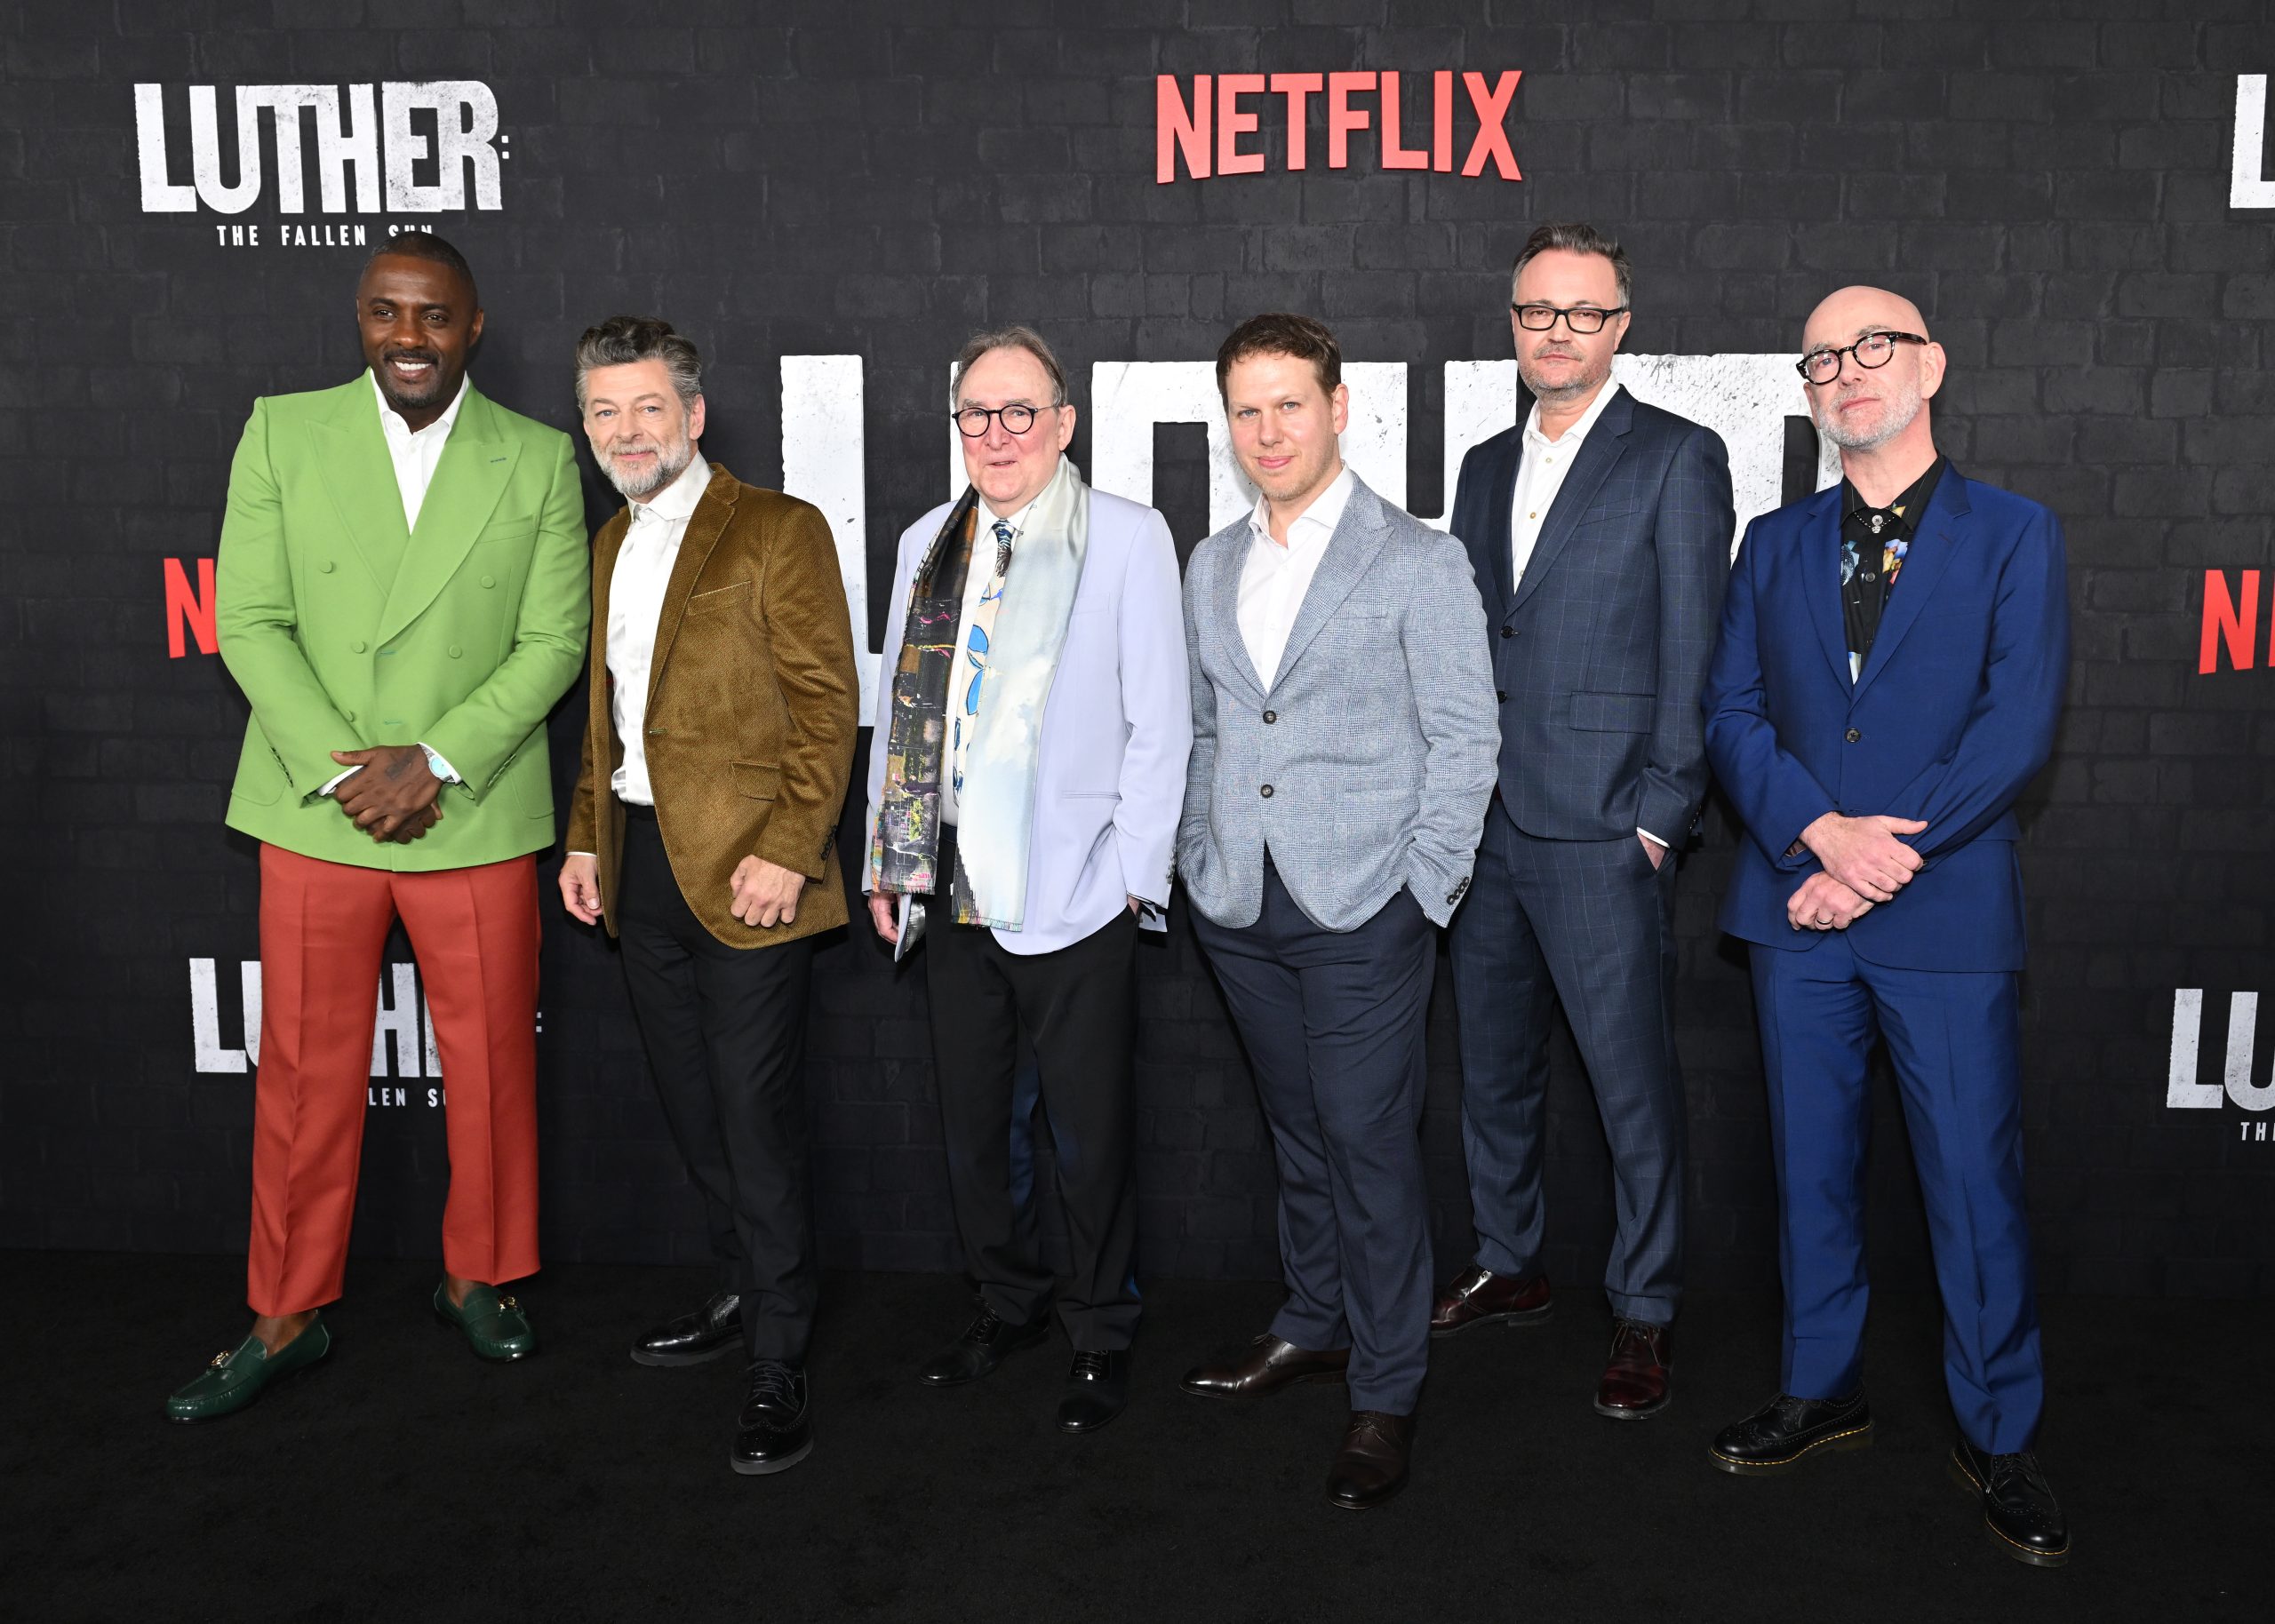 Red Carpet Rundown: ‘LUTHER THE FALLEN SUN’ Premiere In NYC